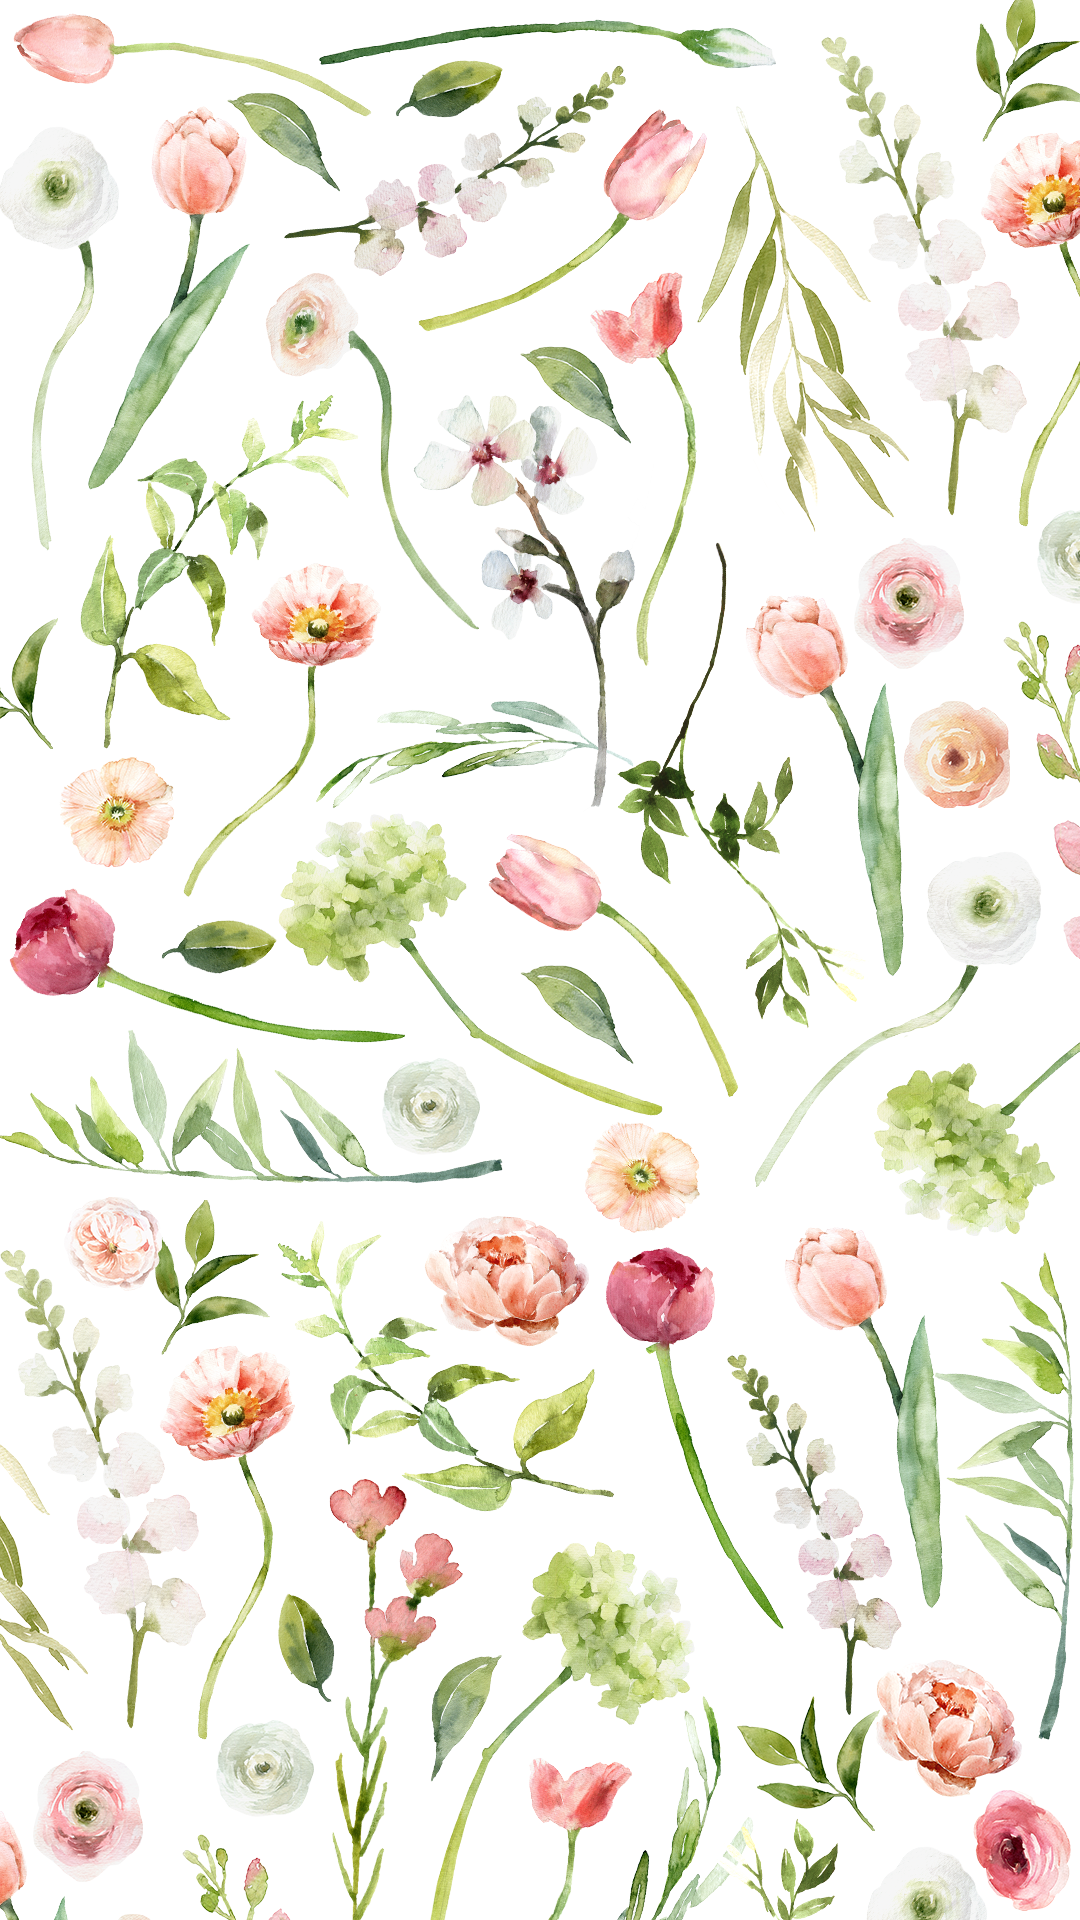 Spring Tech Backgrounds for your Computer and iPhone